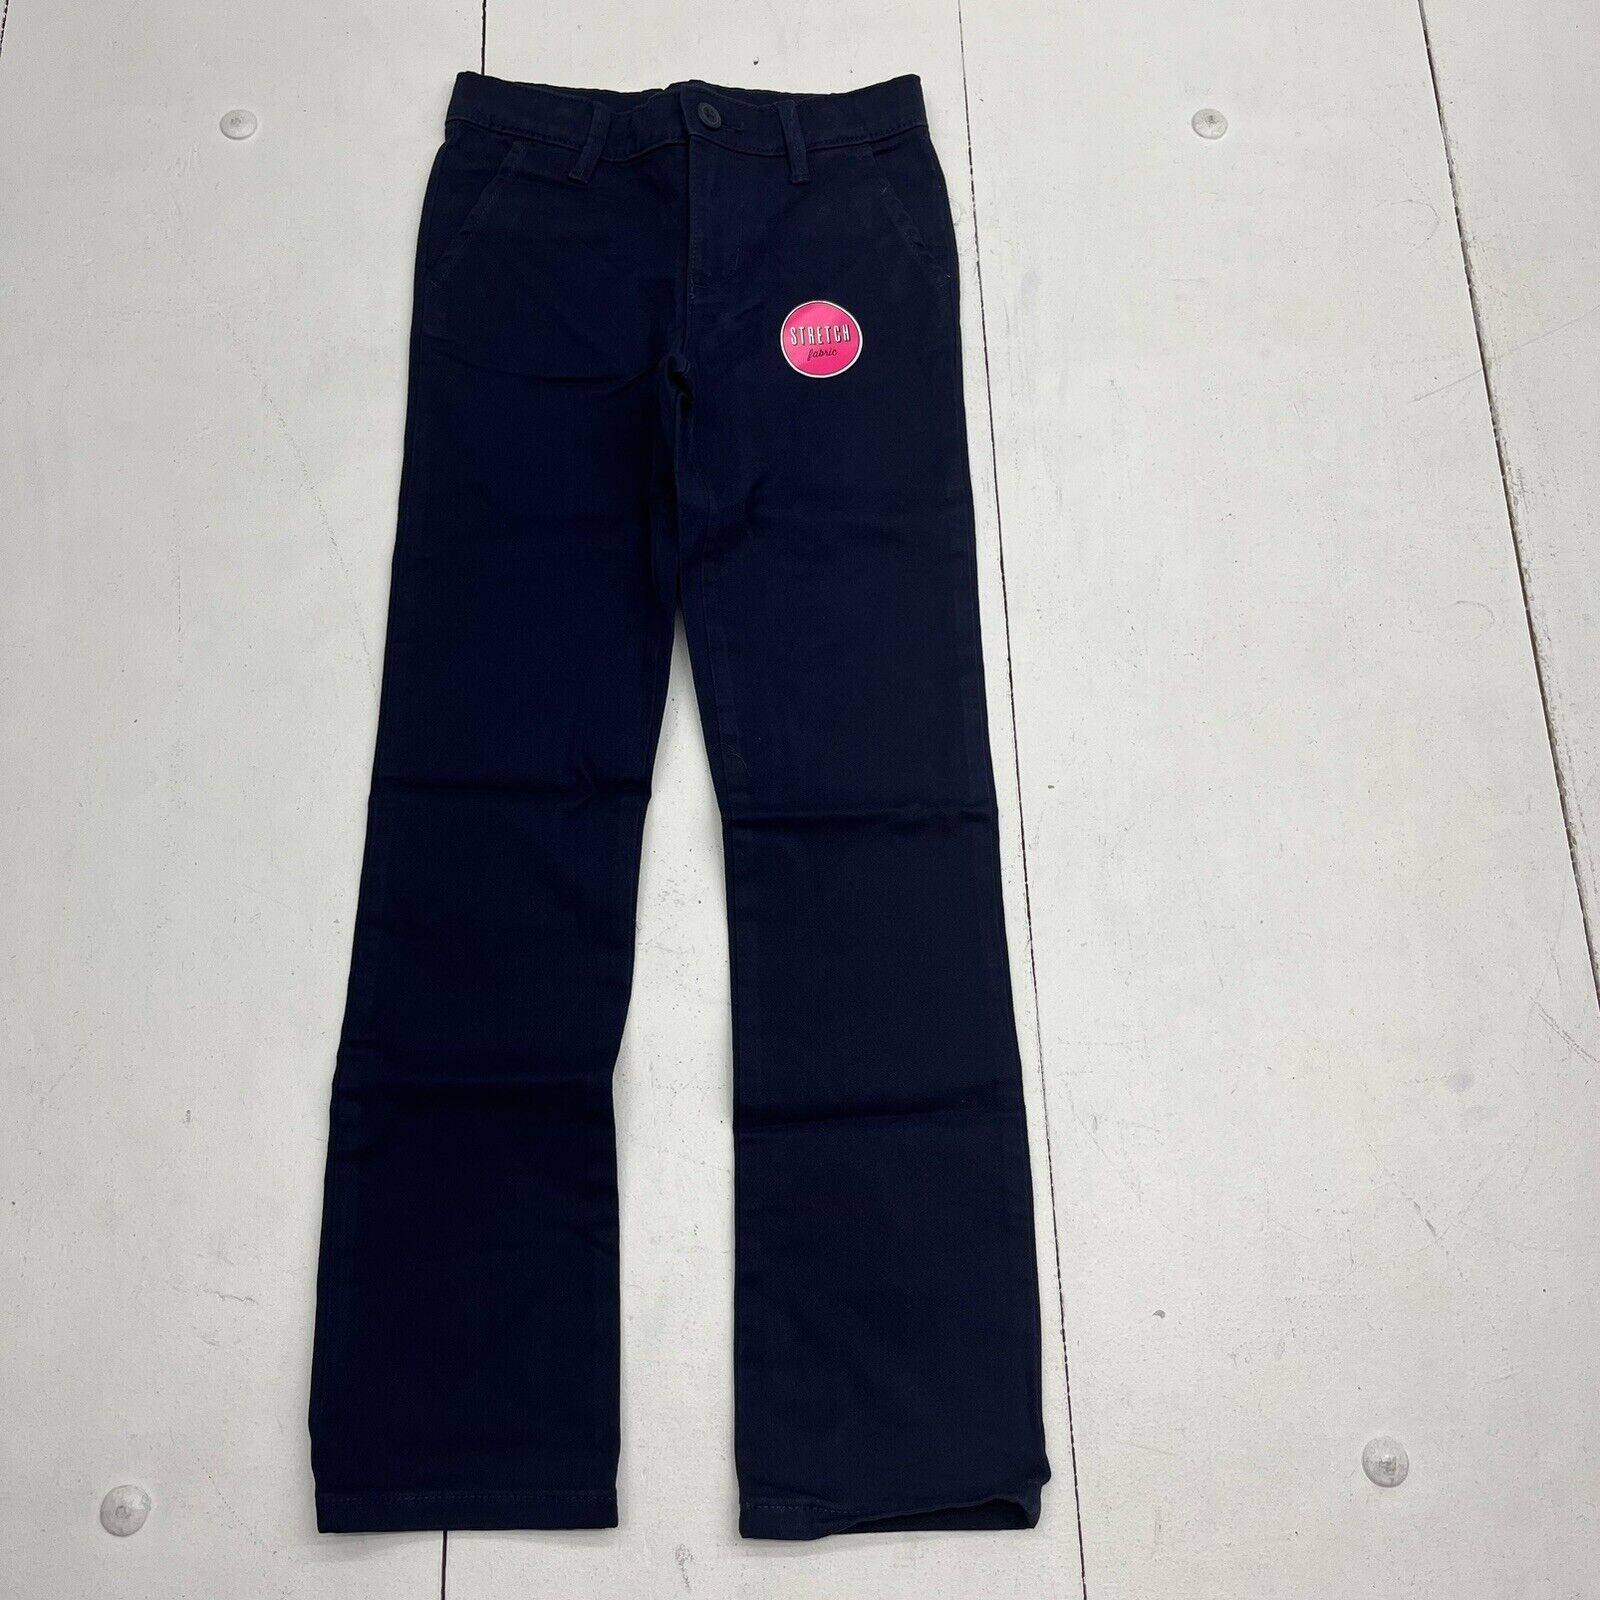 The Children's Place Navy Blue Slim Pants Girls Size 8 NEW